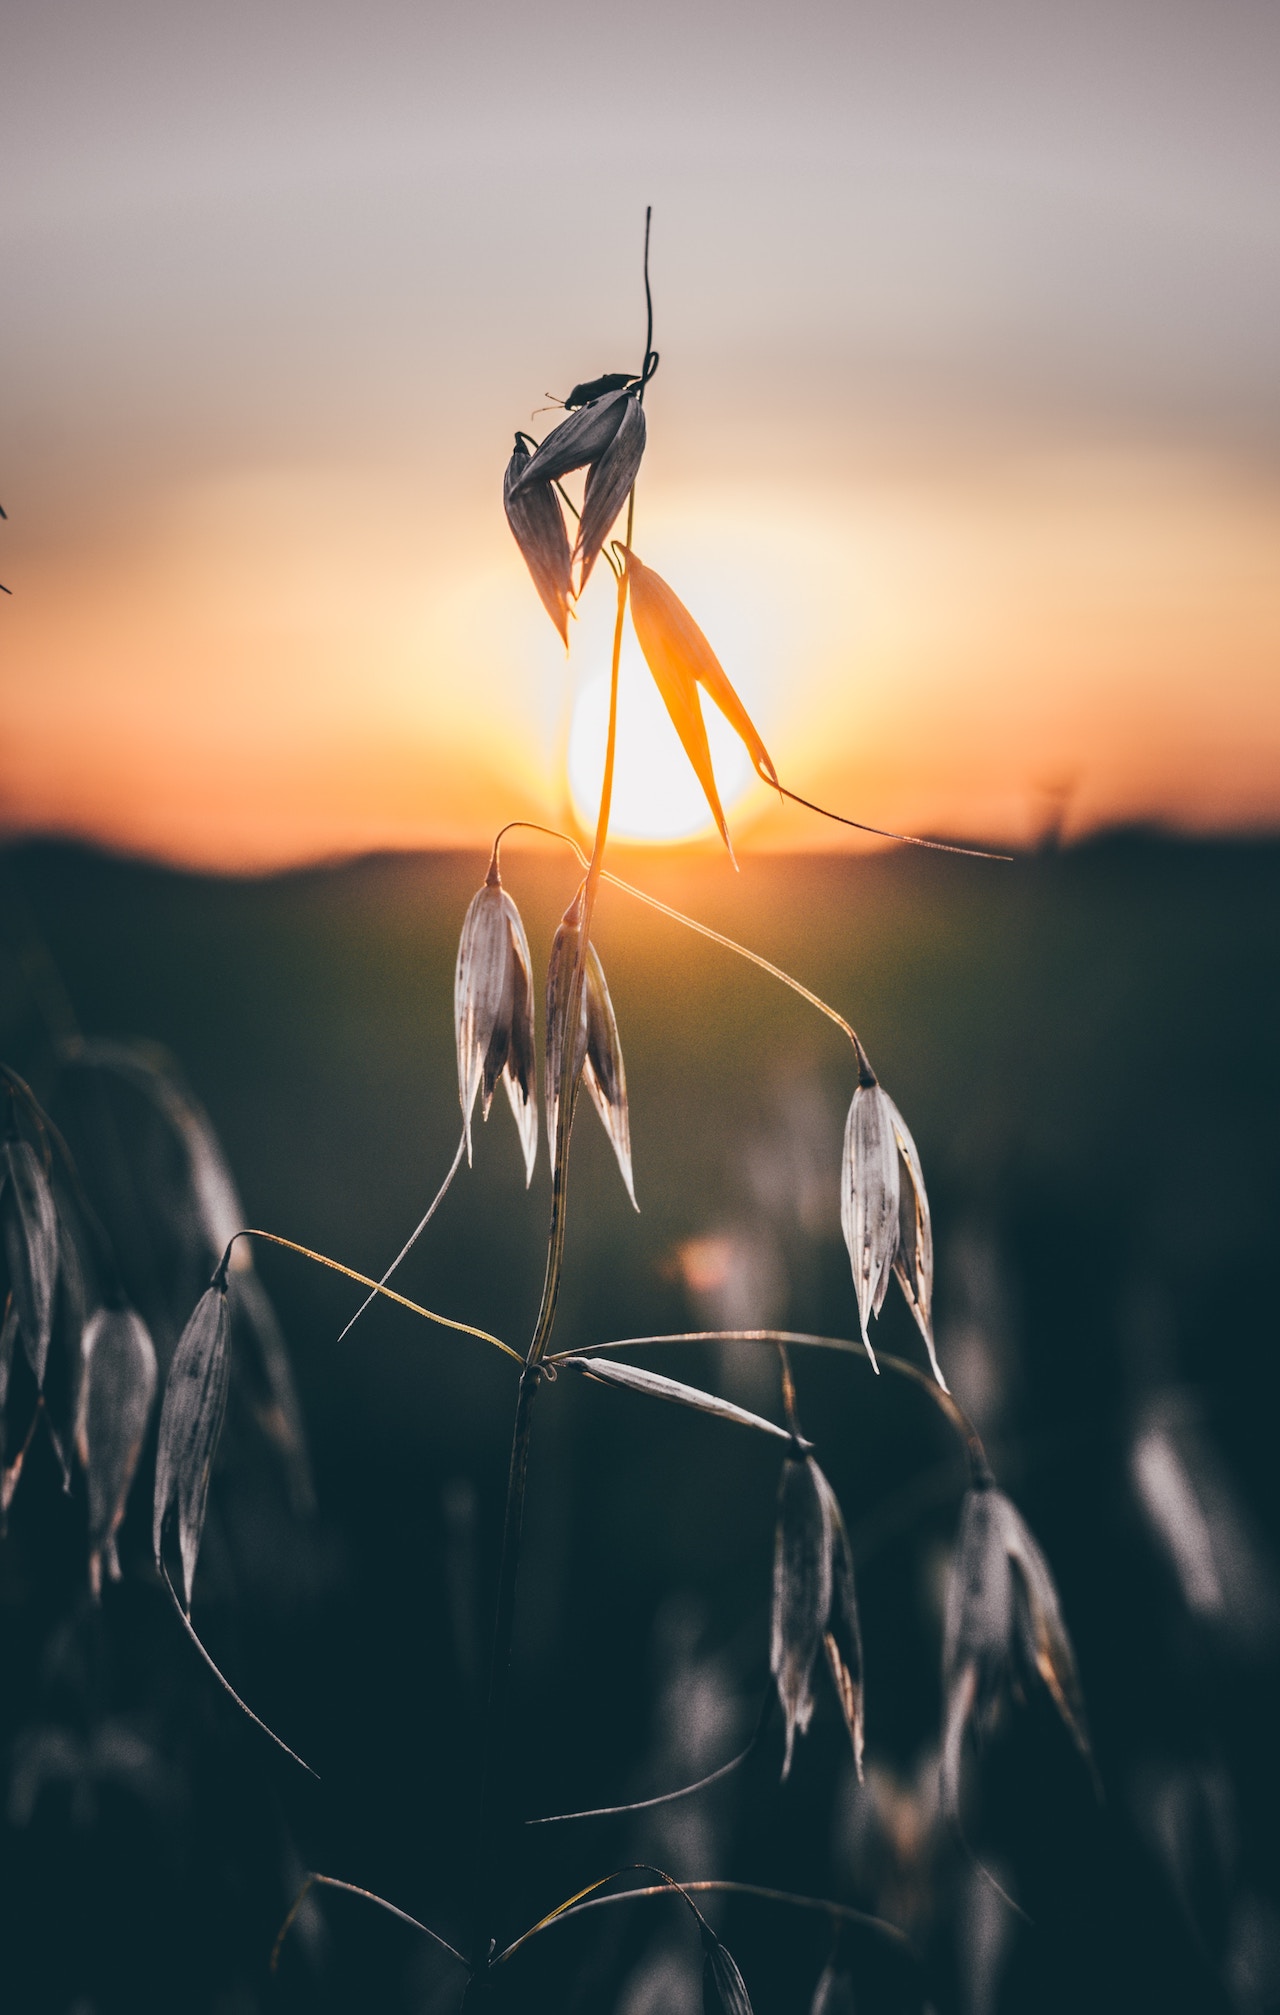 dead seed pods with sunset